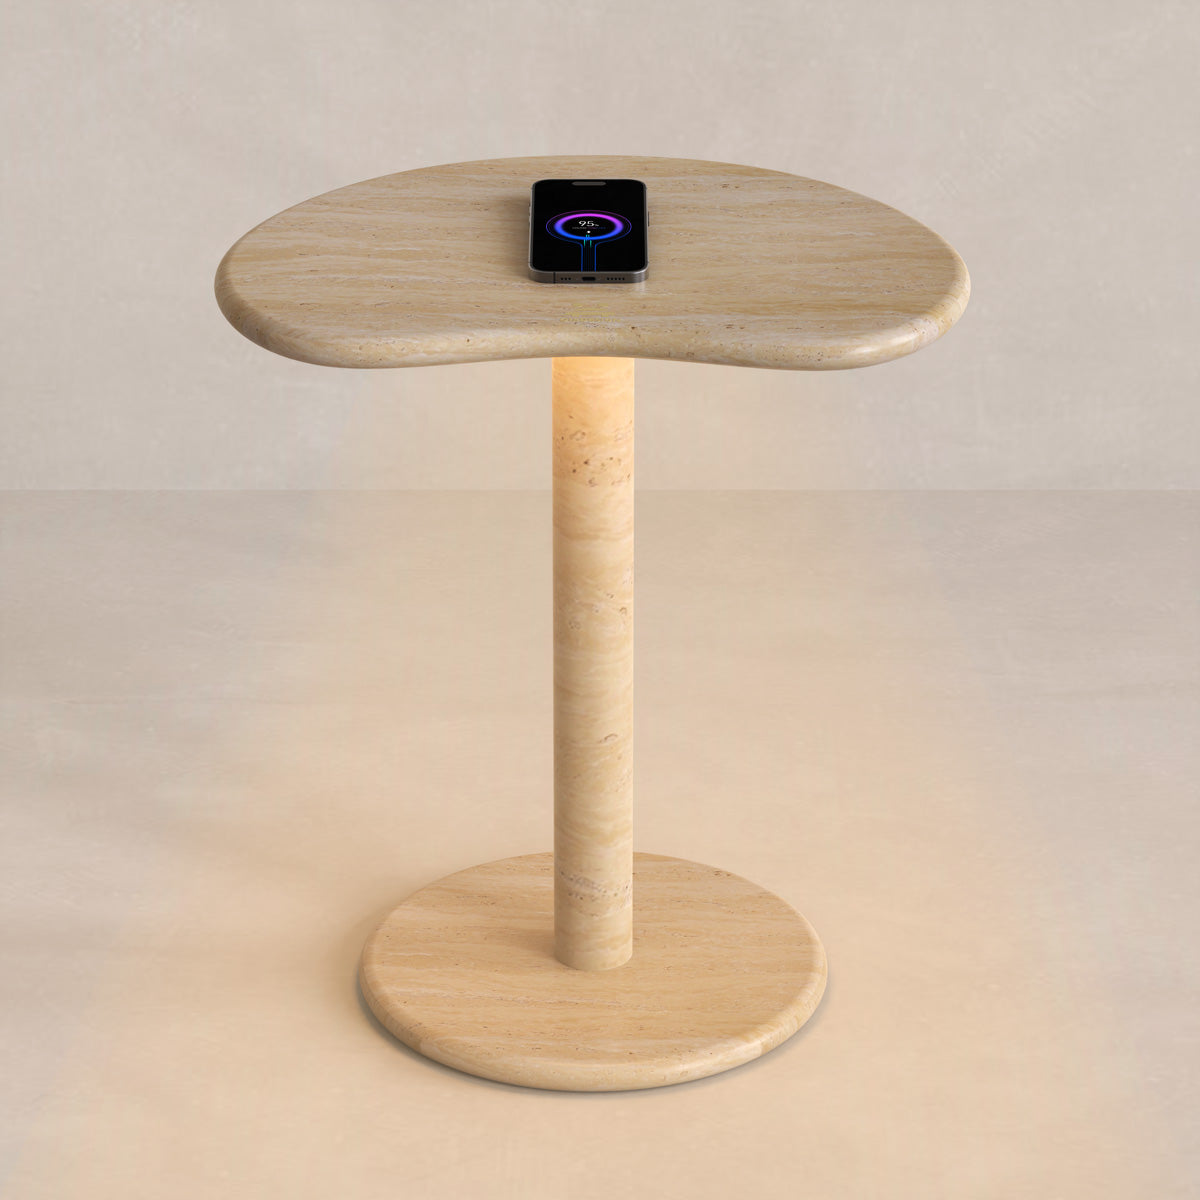 oval travertine table side table with wireless charging wireless charging side table travertine side table